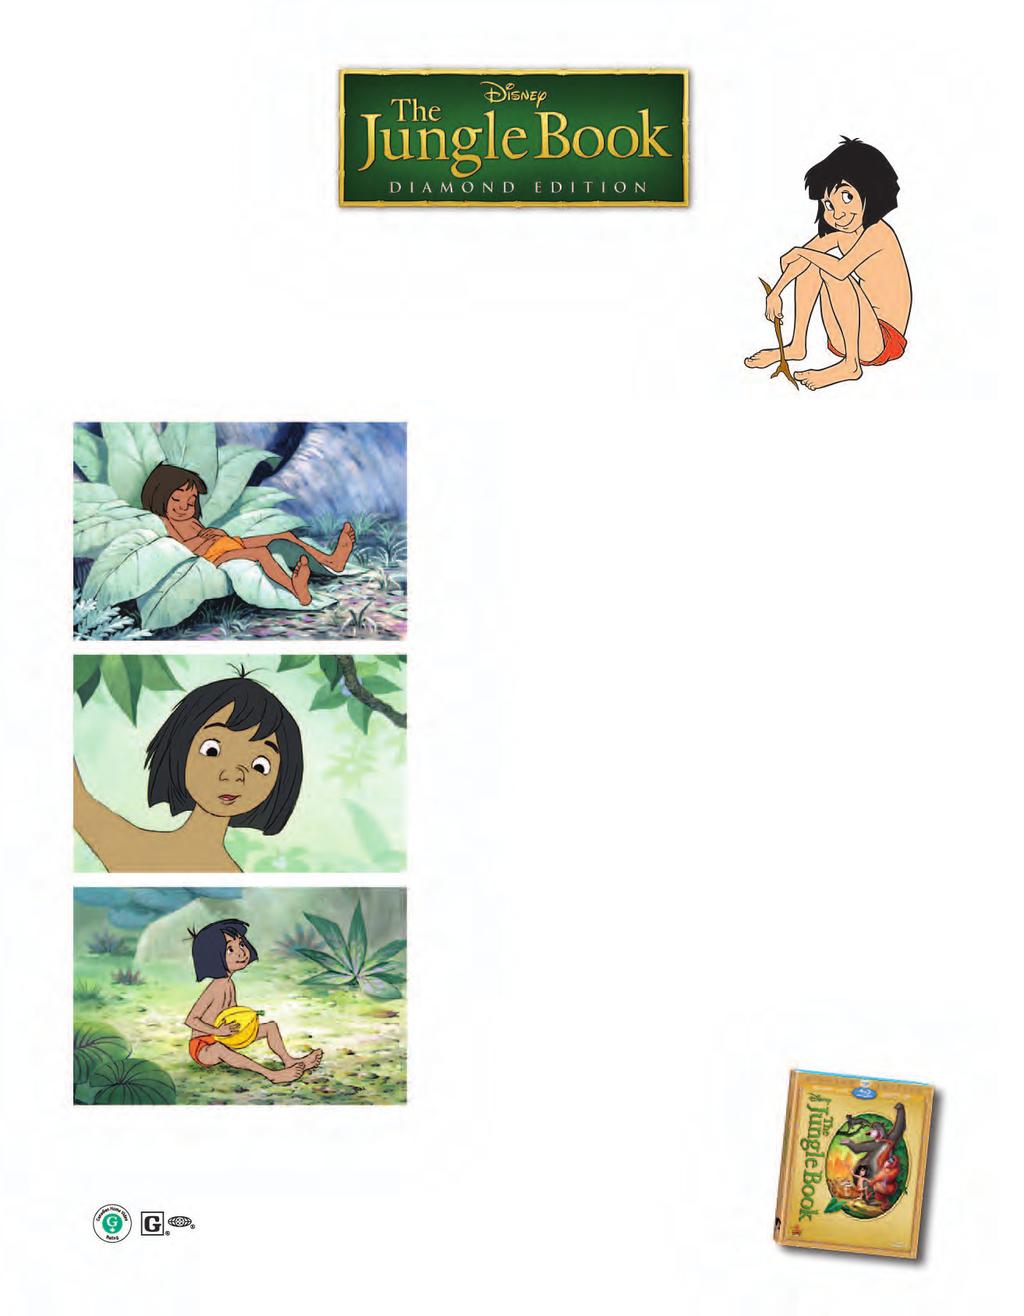 MOWGLI I like being a bear! Role: The jungle s favorite man cub, Mowgli was raised by a family of wolves and lives in the jungle with his animal friends.